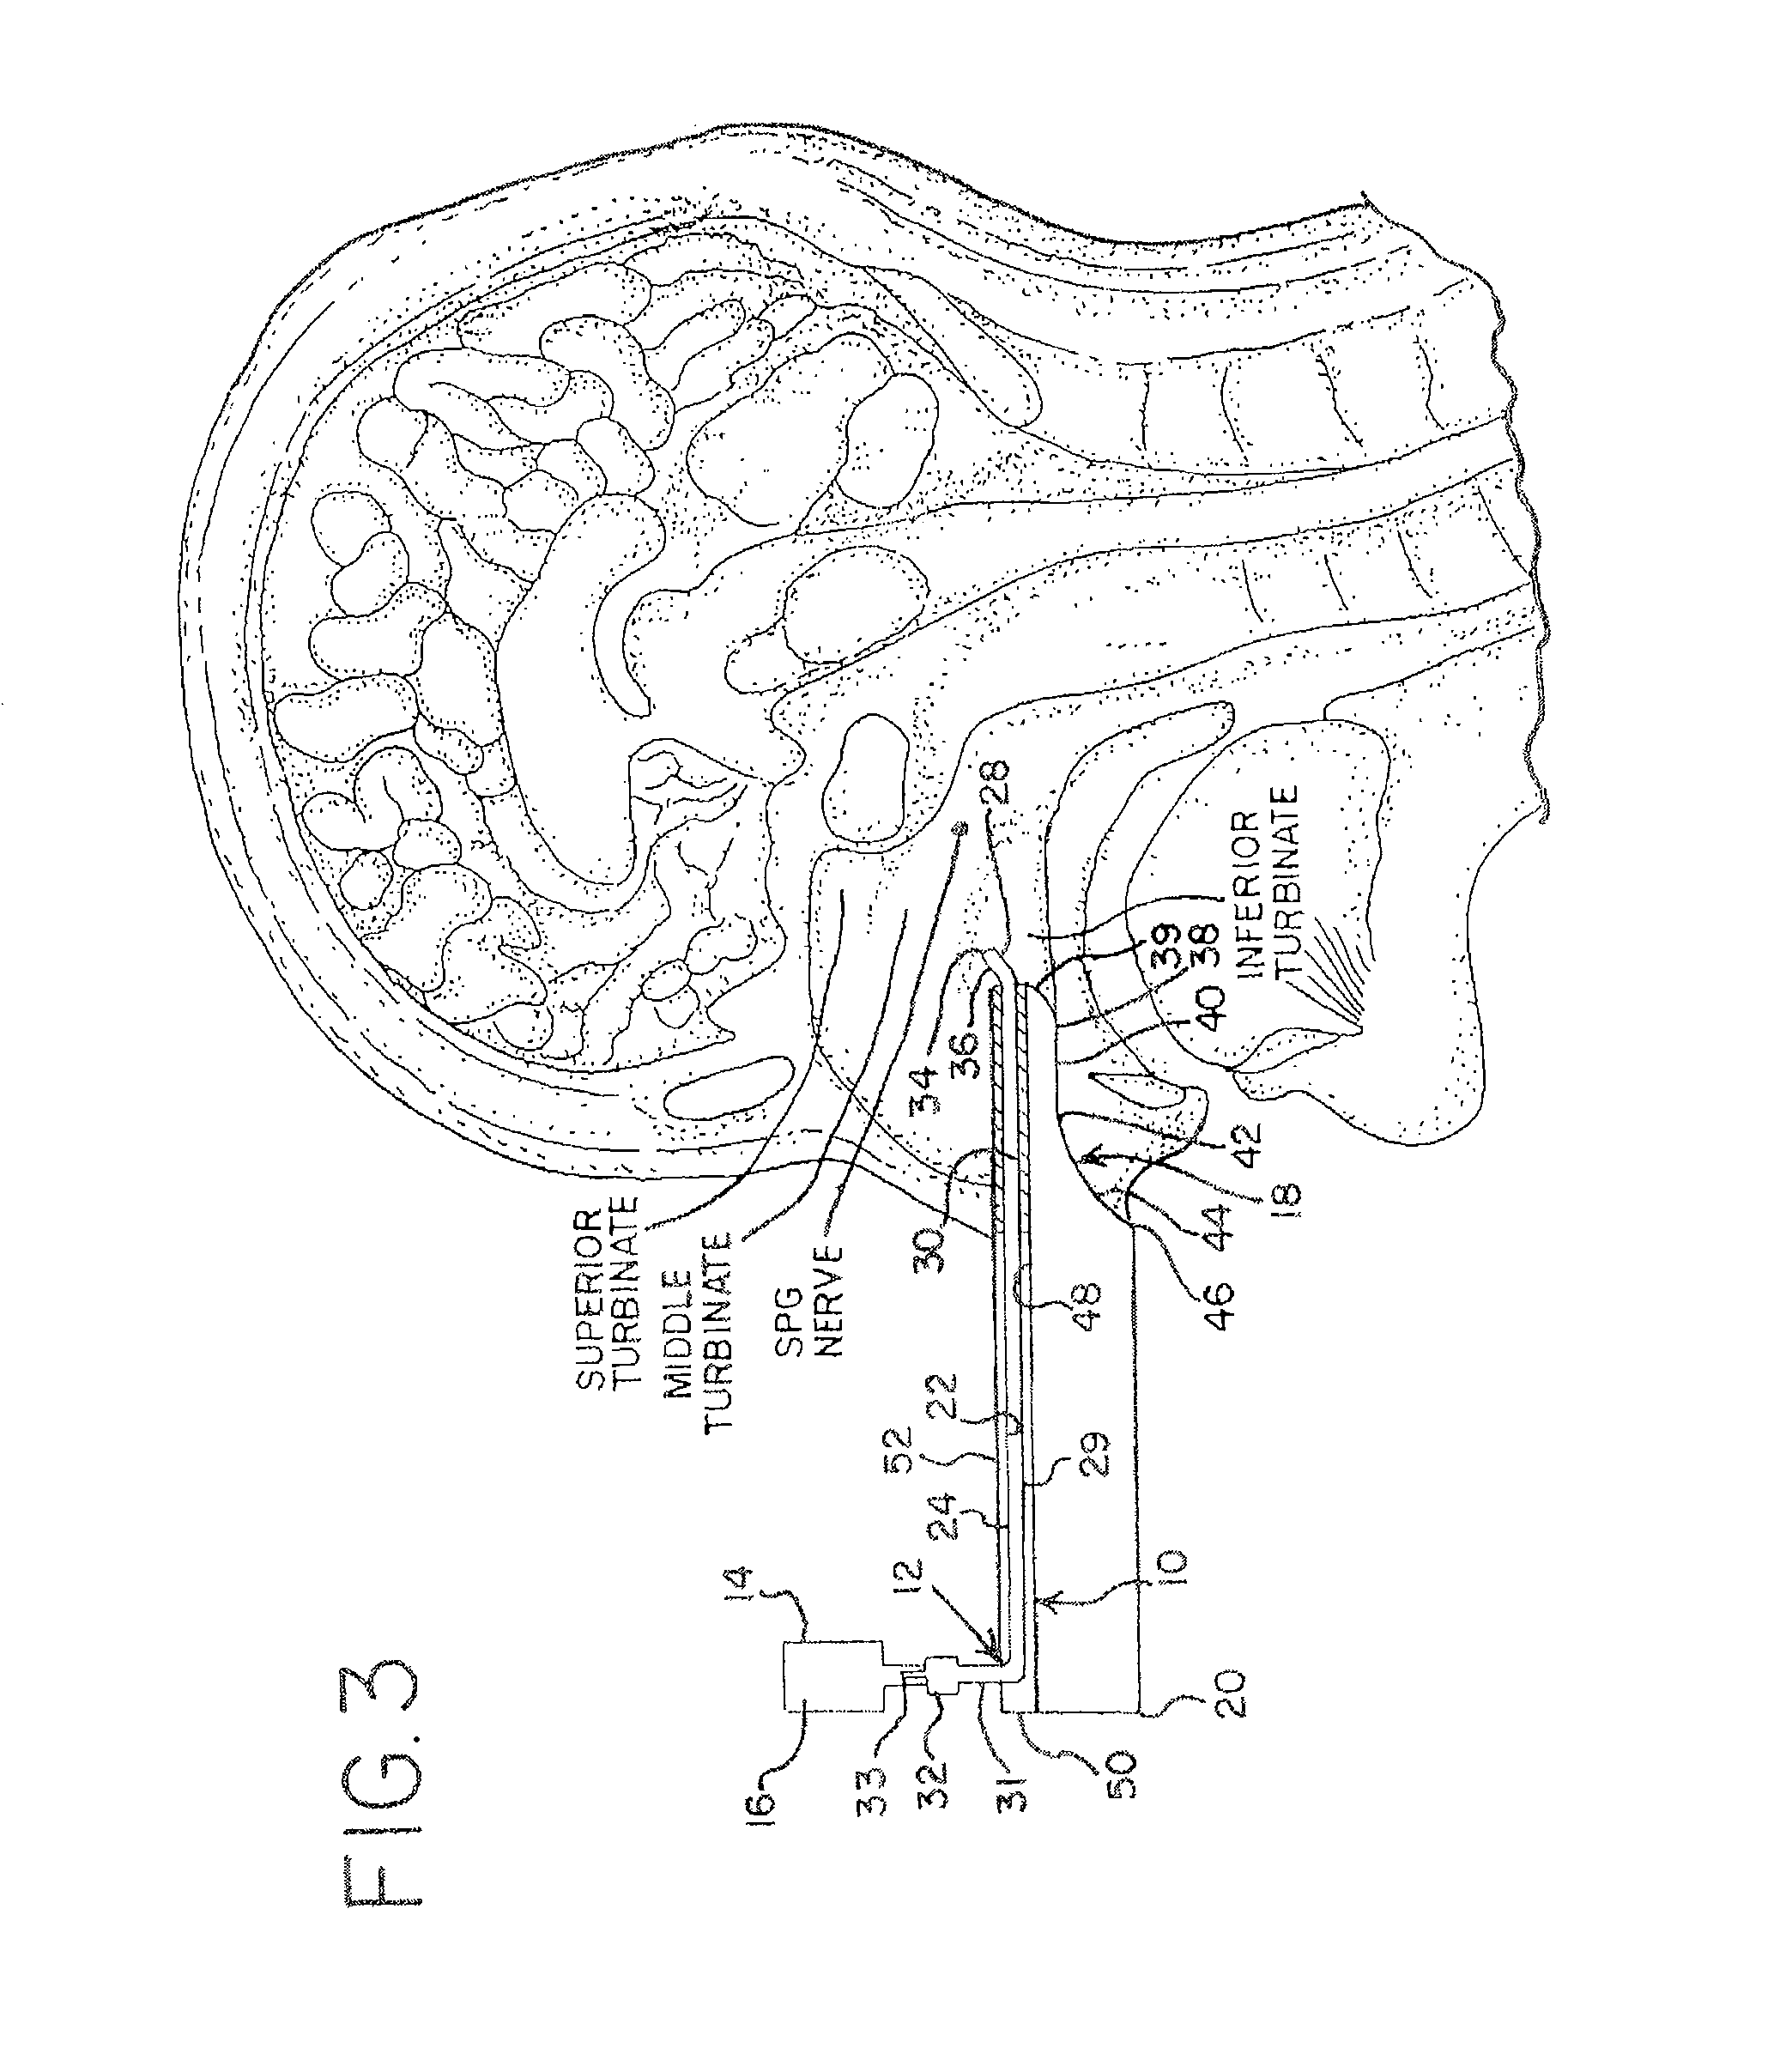 Devices for Delivering a Medicament and Methods for Ameliorating Pain